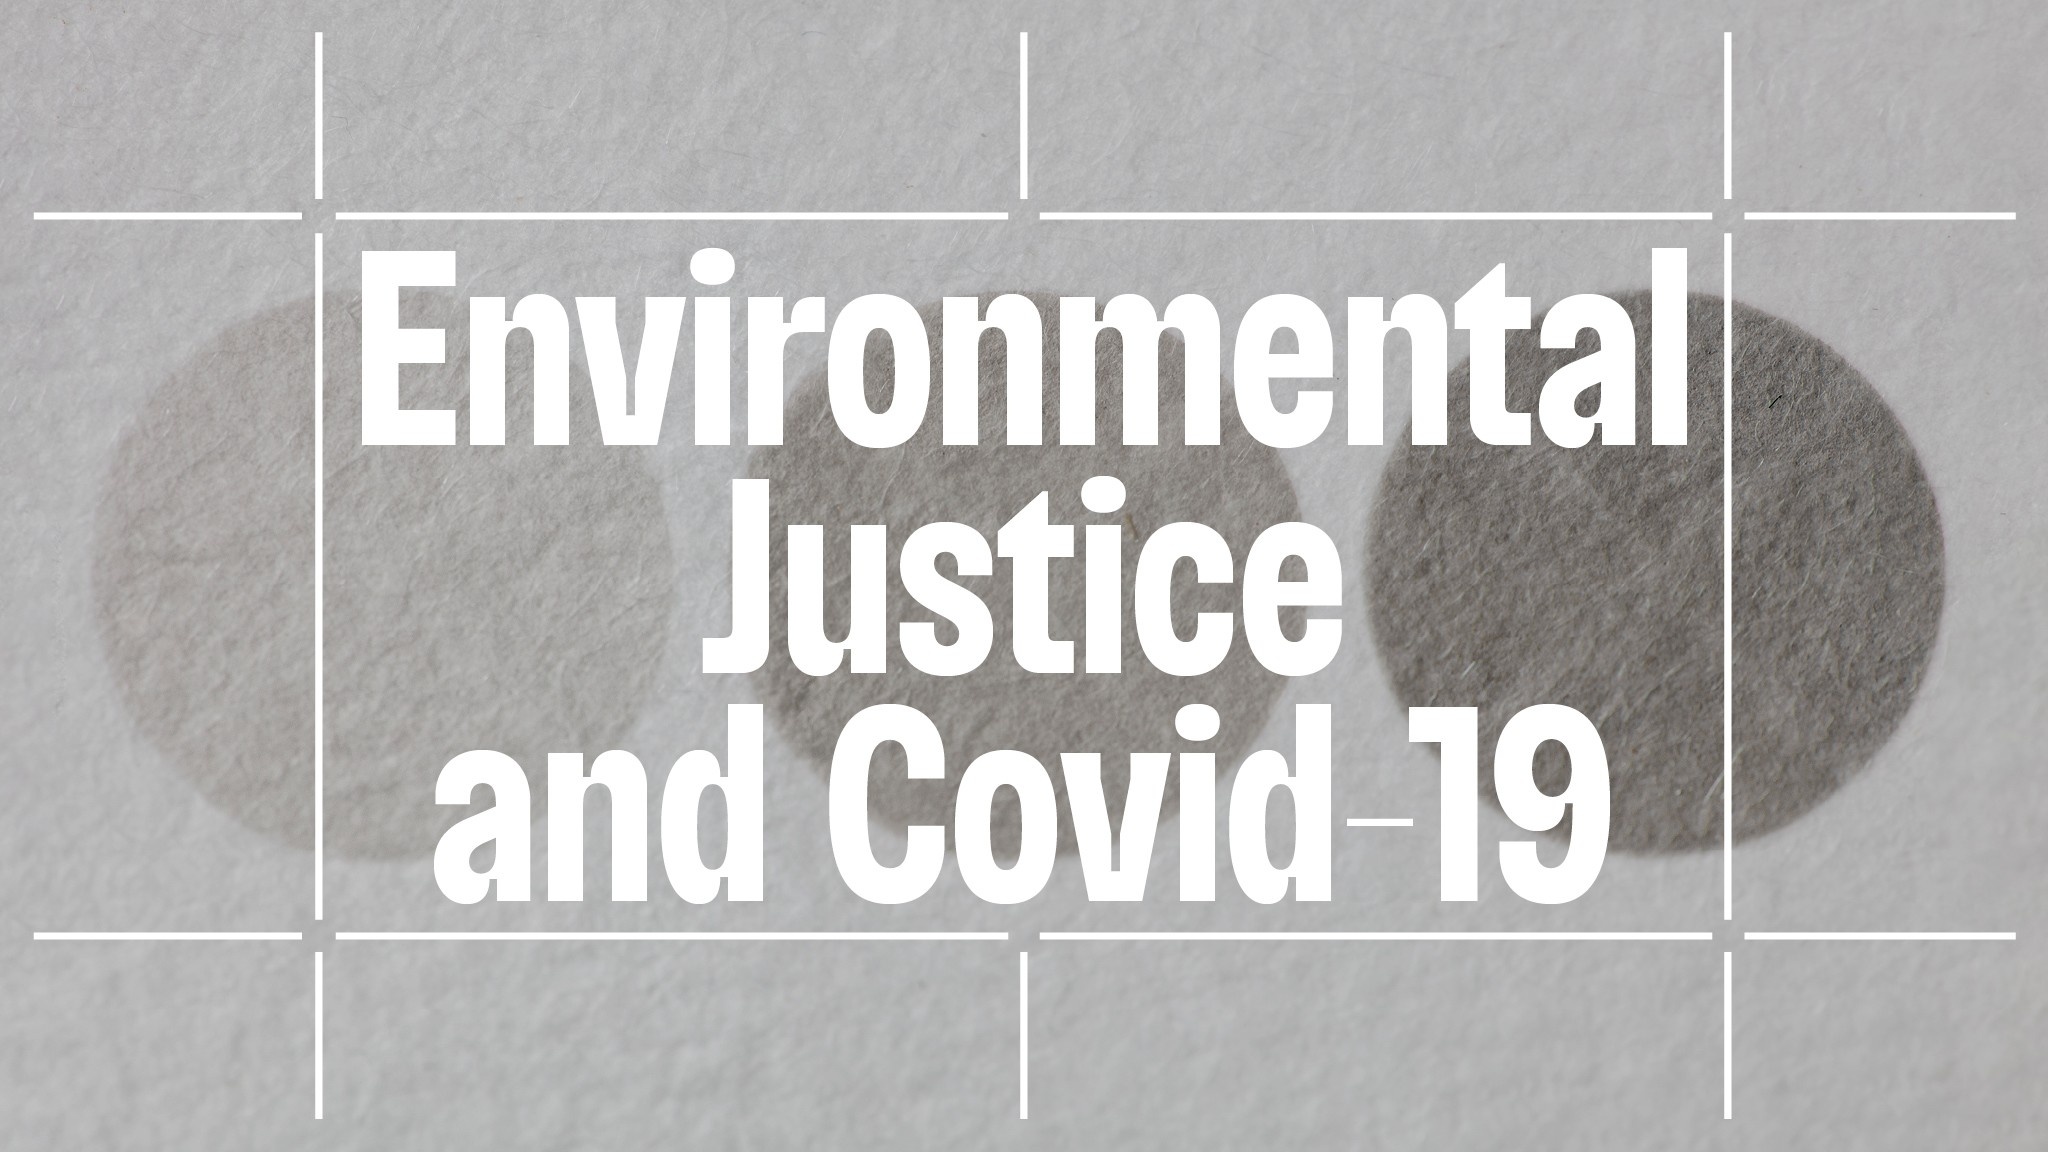 The event title "Environmental Justice and Covid-19" overlaid on an image of three gray dots on a grainy piece of paper. The dots vary from light to darker gray. 